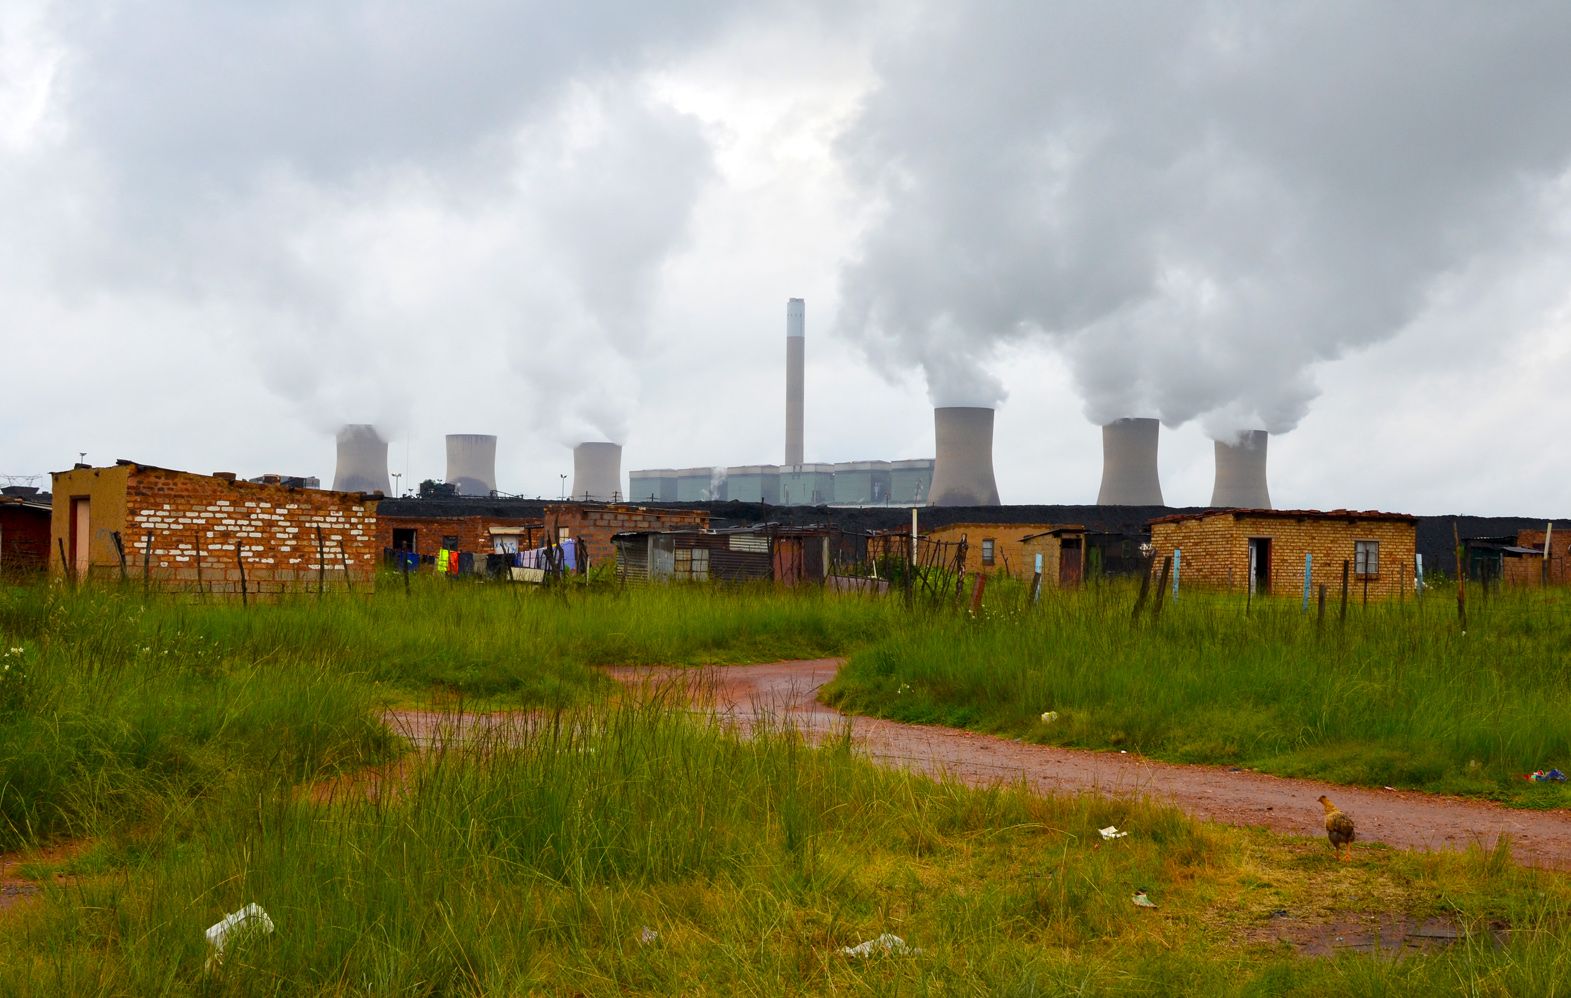 Duvha Power Station looms over the Masakhane informal settlement near eMalahleni in Mpumalanga. In 2015, the government pledged R18-billion to assist or relocate 15 mining-affected communities, including Masakhane. Image by Mark Olalde. South Africa, 2017.